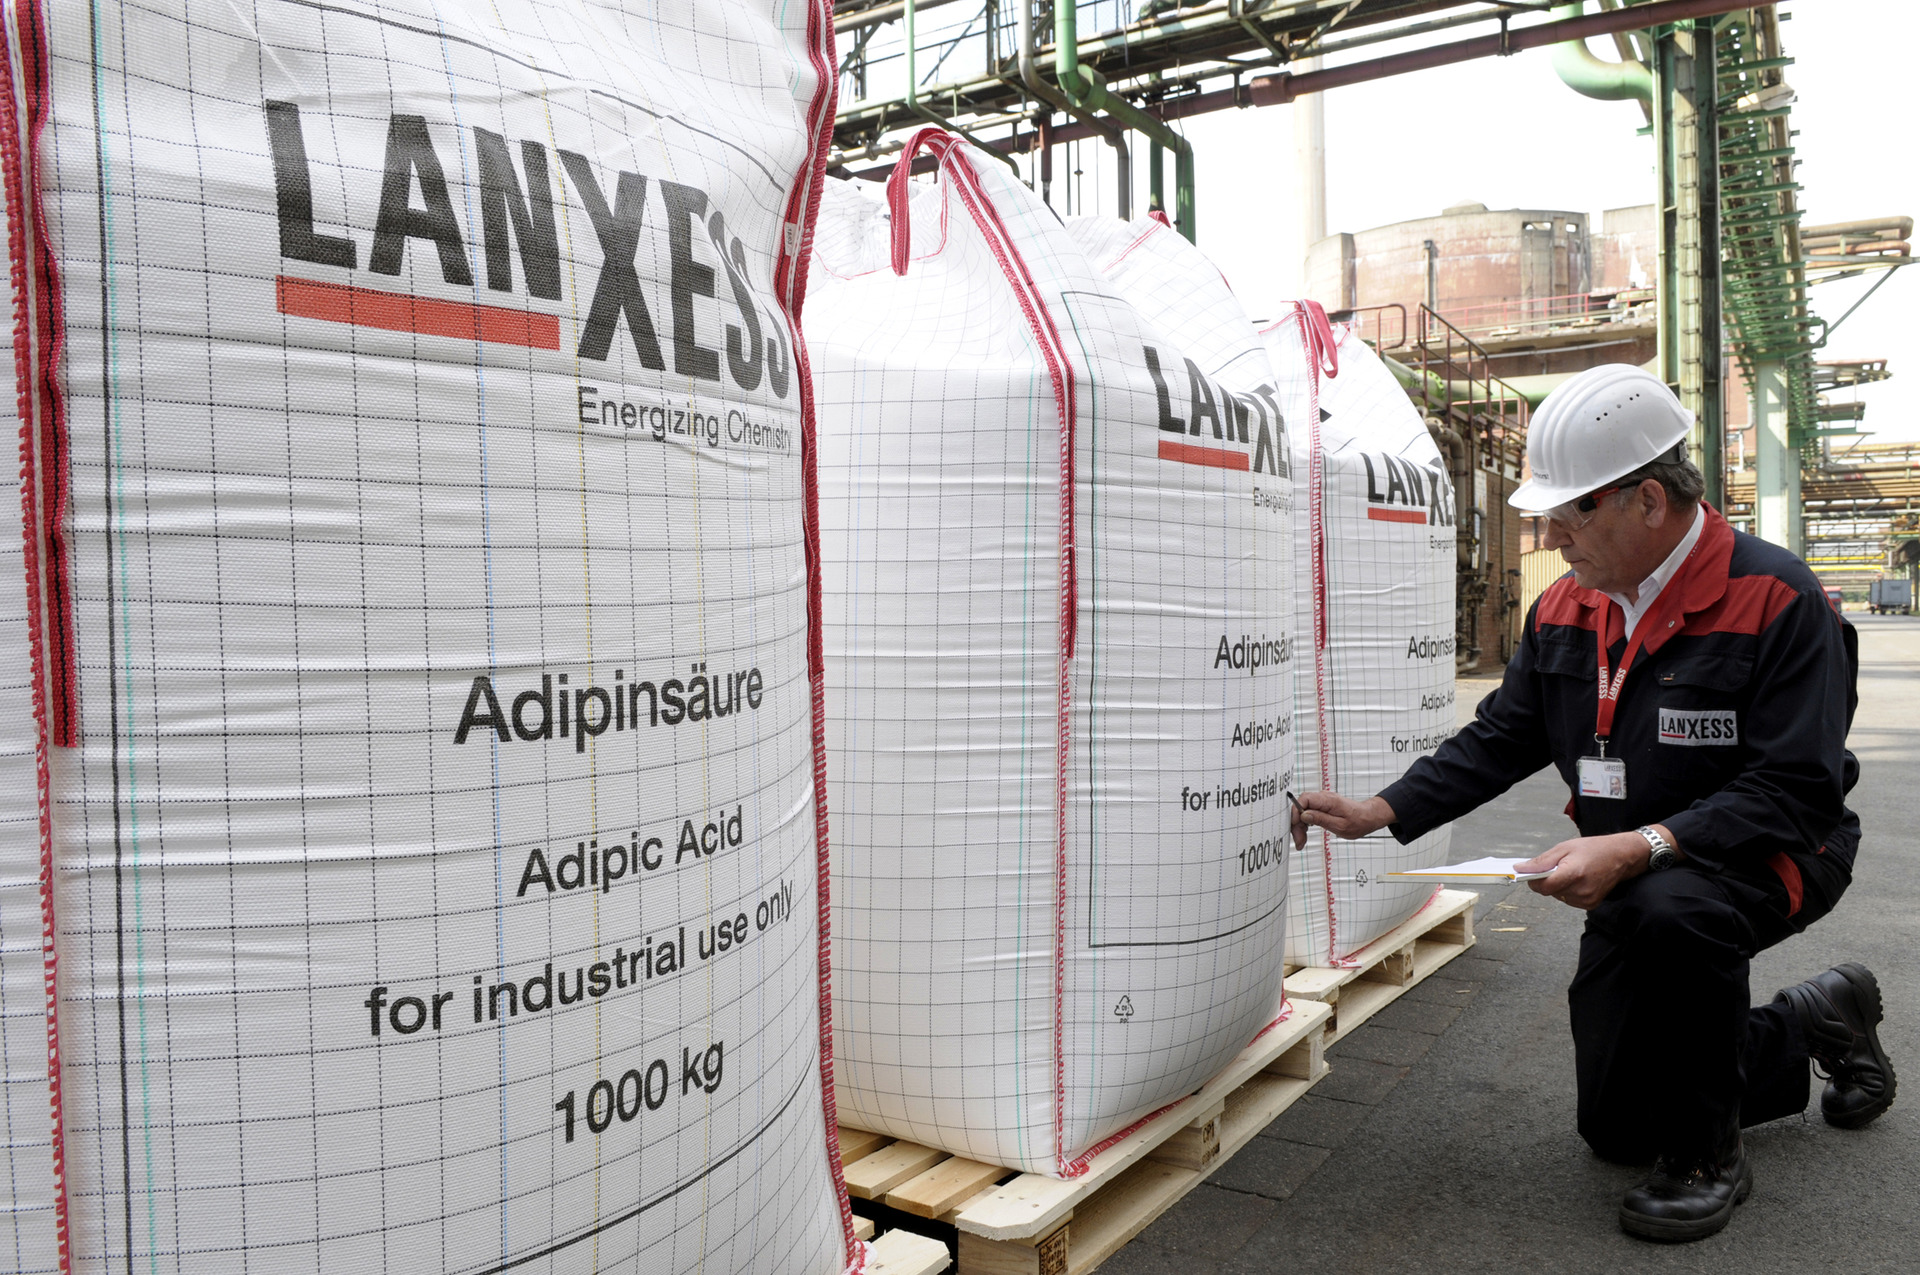 Lanxess has reportedly raised its prices for adipic acid.